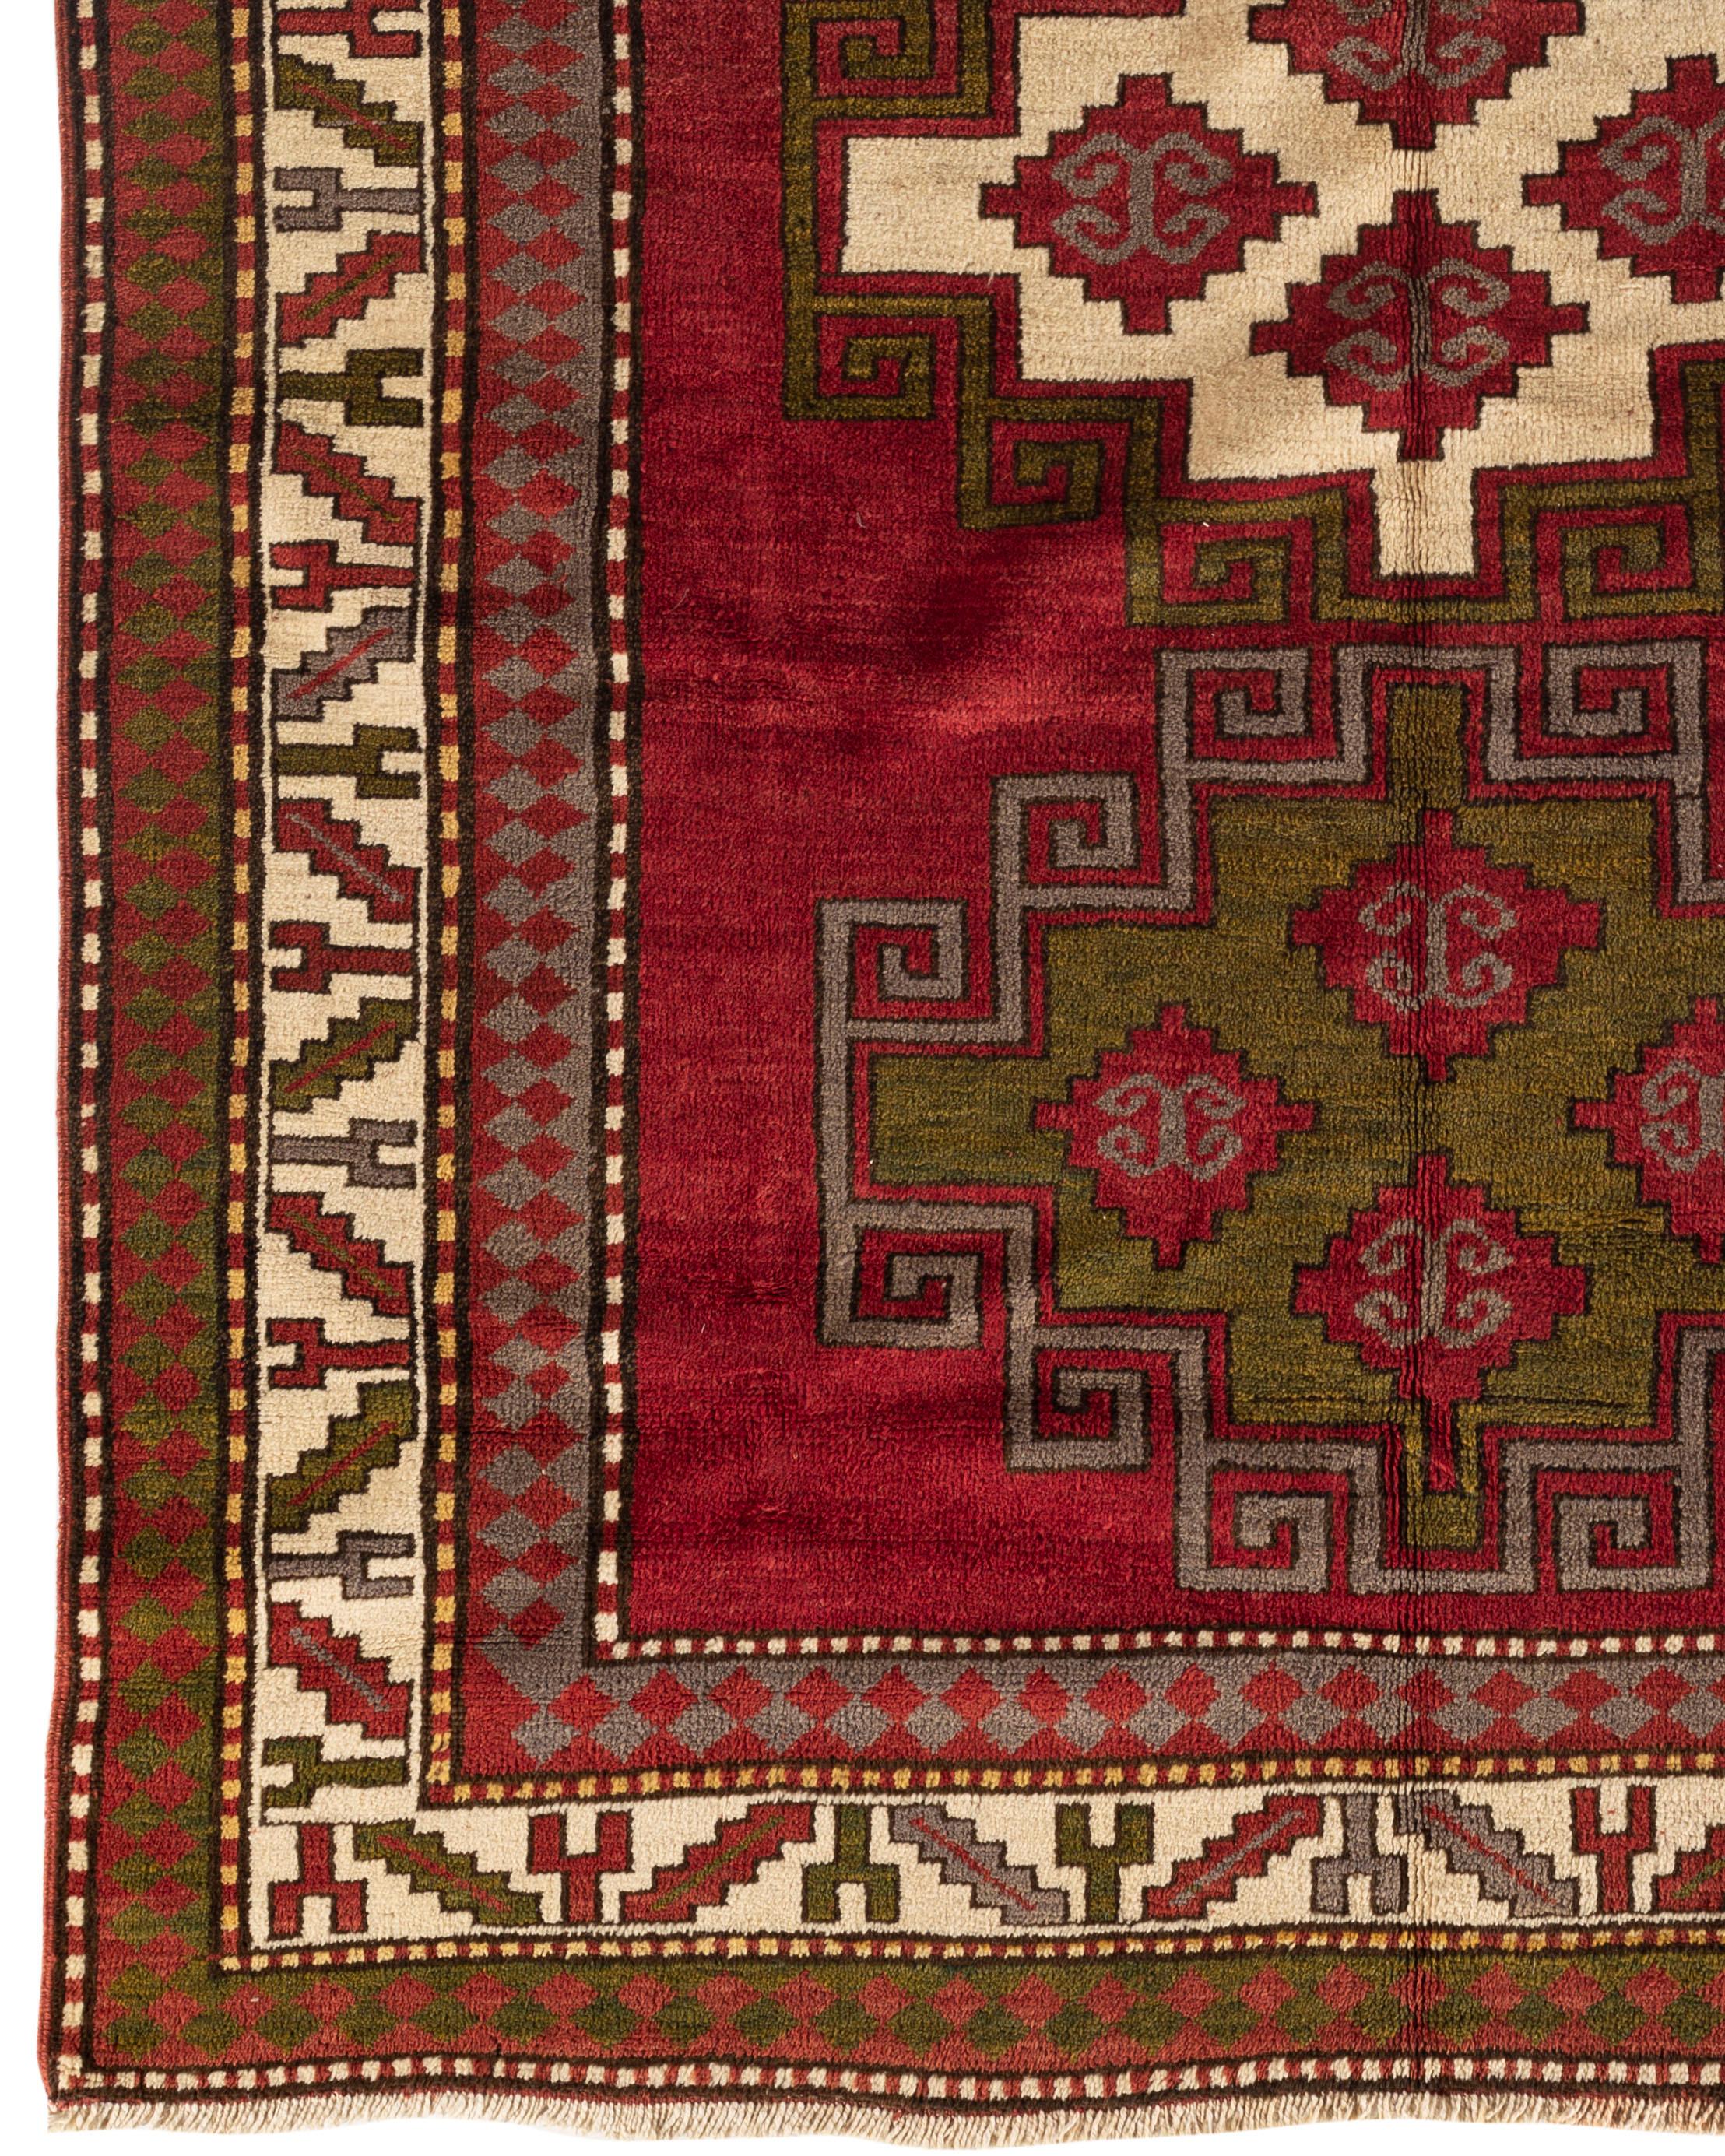 Antique Caucasian Kazak rug, circa 1900. A south west Caucasian Kazak handwoven rug circa 1900, with a bold design of three medallions, that create a true sense of beauty, to this tribal piece. The Caucasus Mountains, between Persia and Russia are